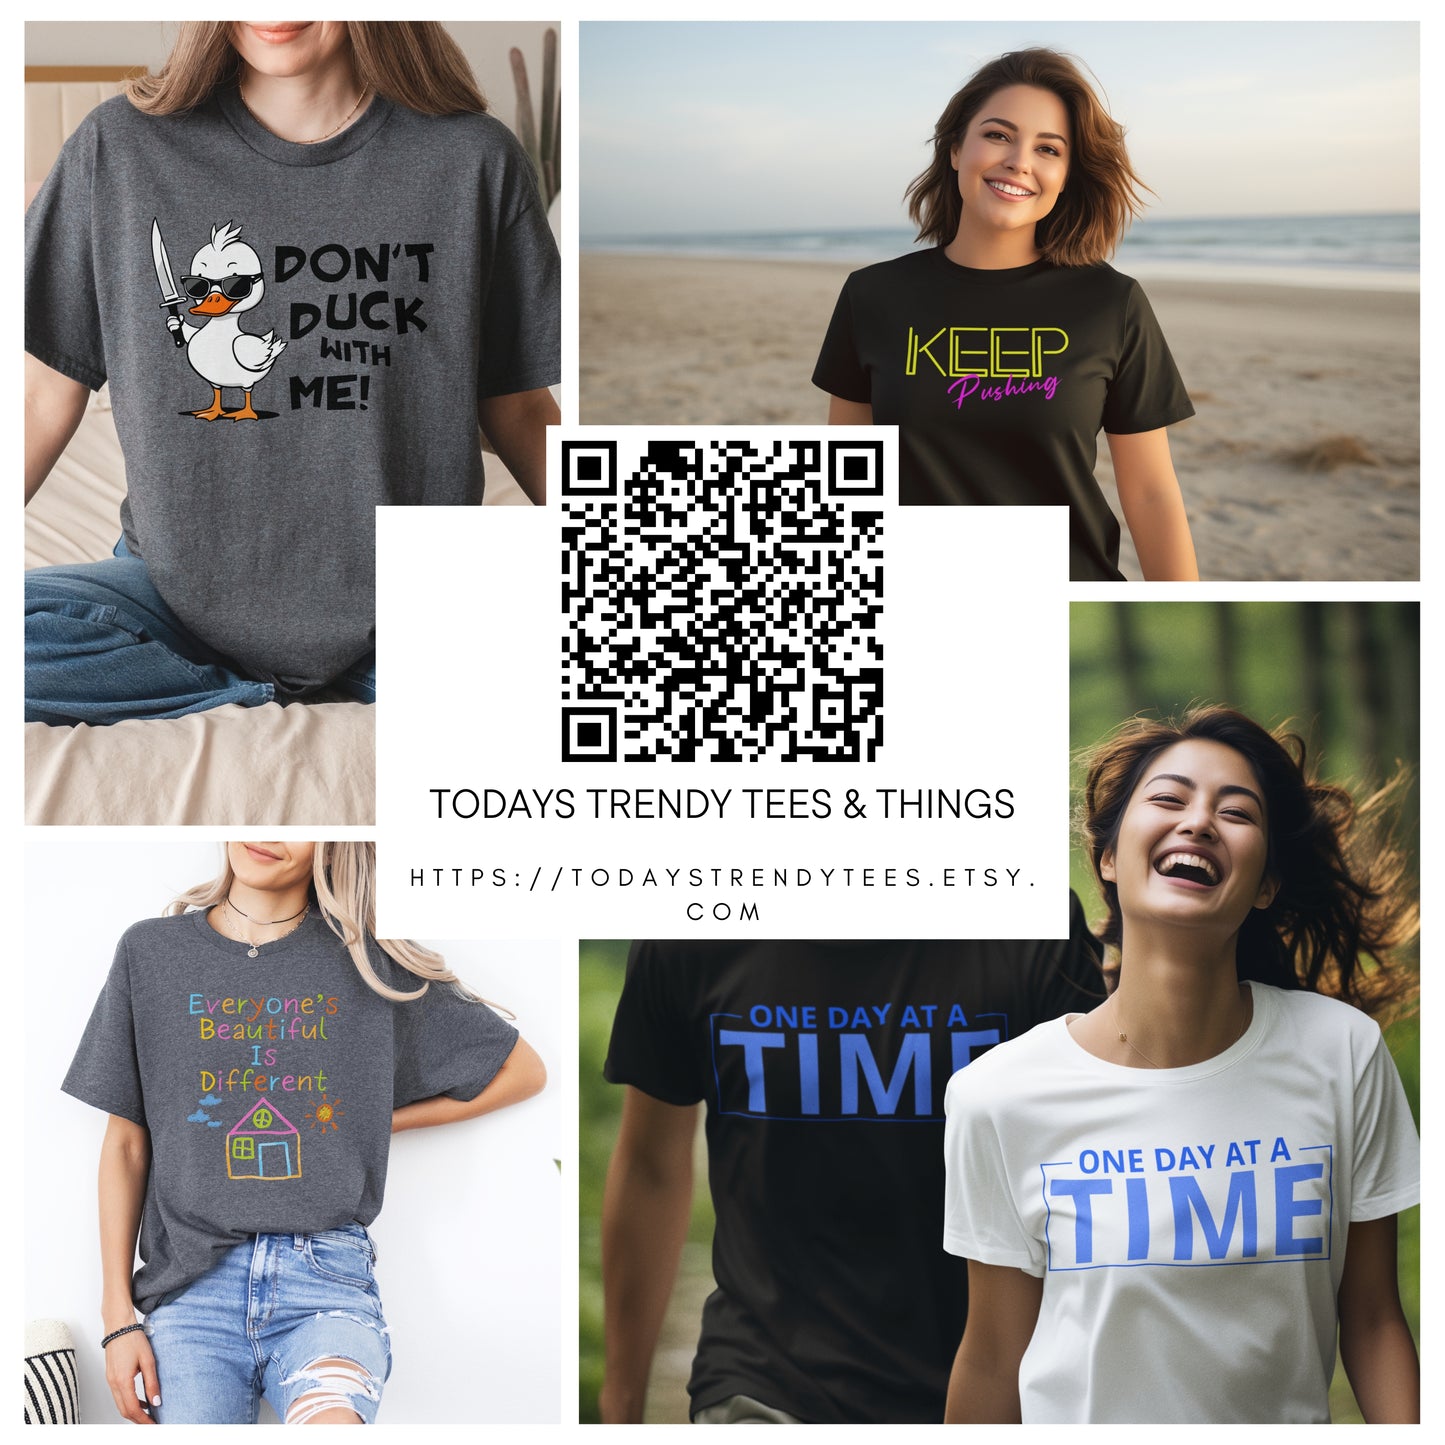 Step by Step: The 'One Day at a Time' Tee